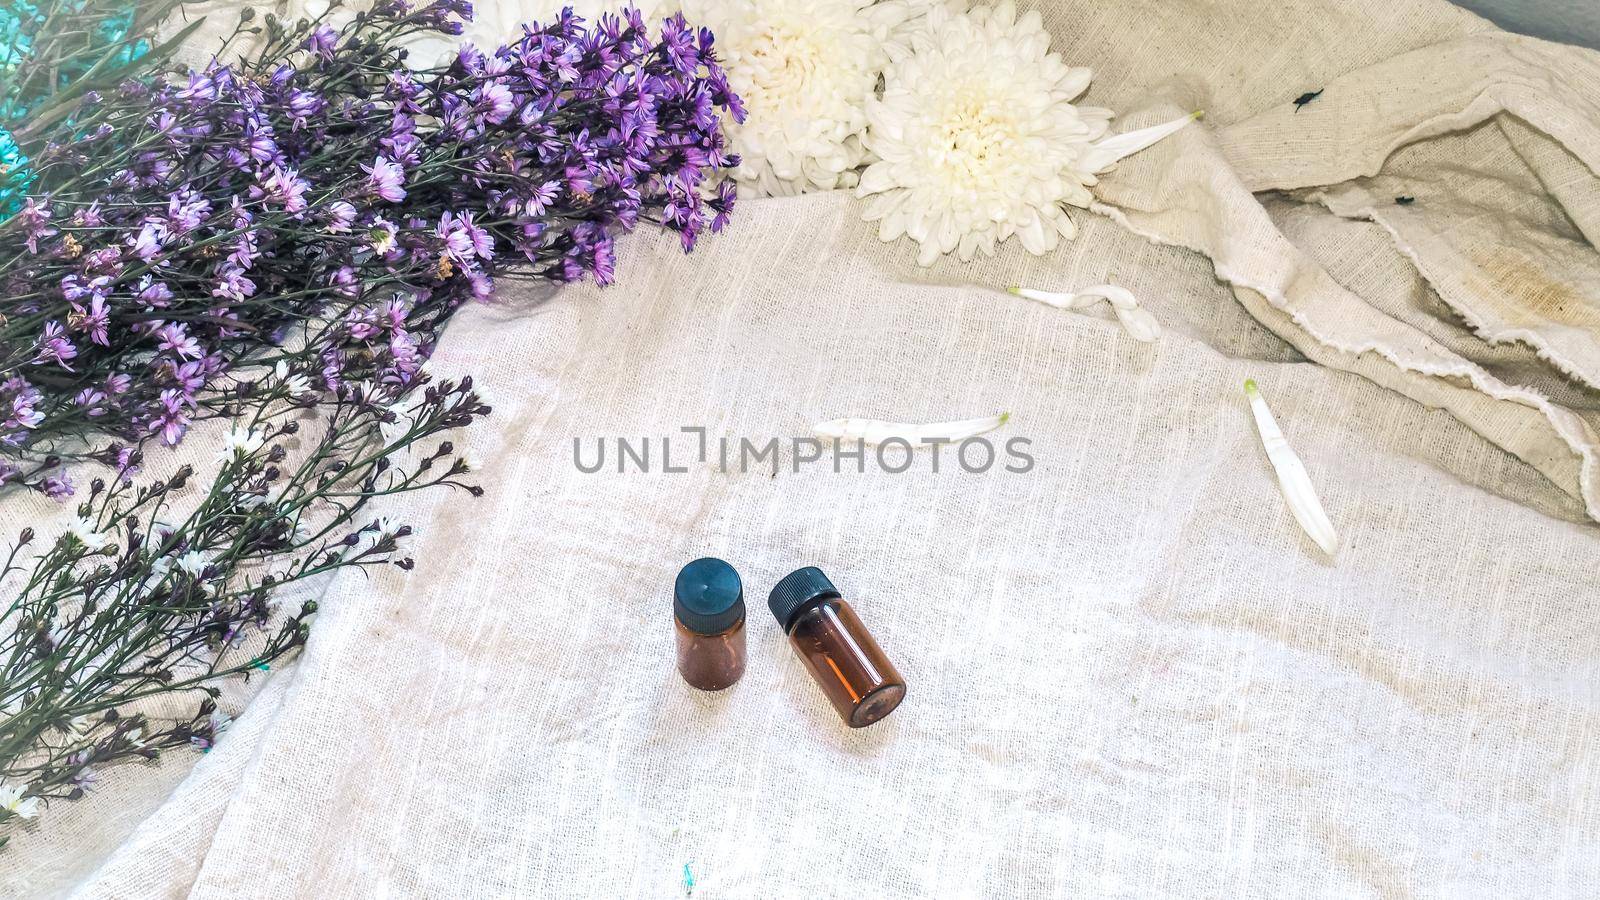 Bottle of essential oil. Herbal medicine or aromatherapy dropper bottle isolated on white background. Fresh rosemary flowers and essential oils on the table